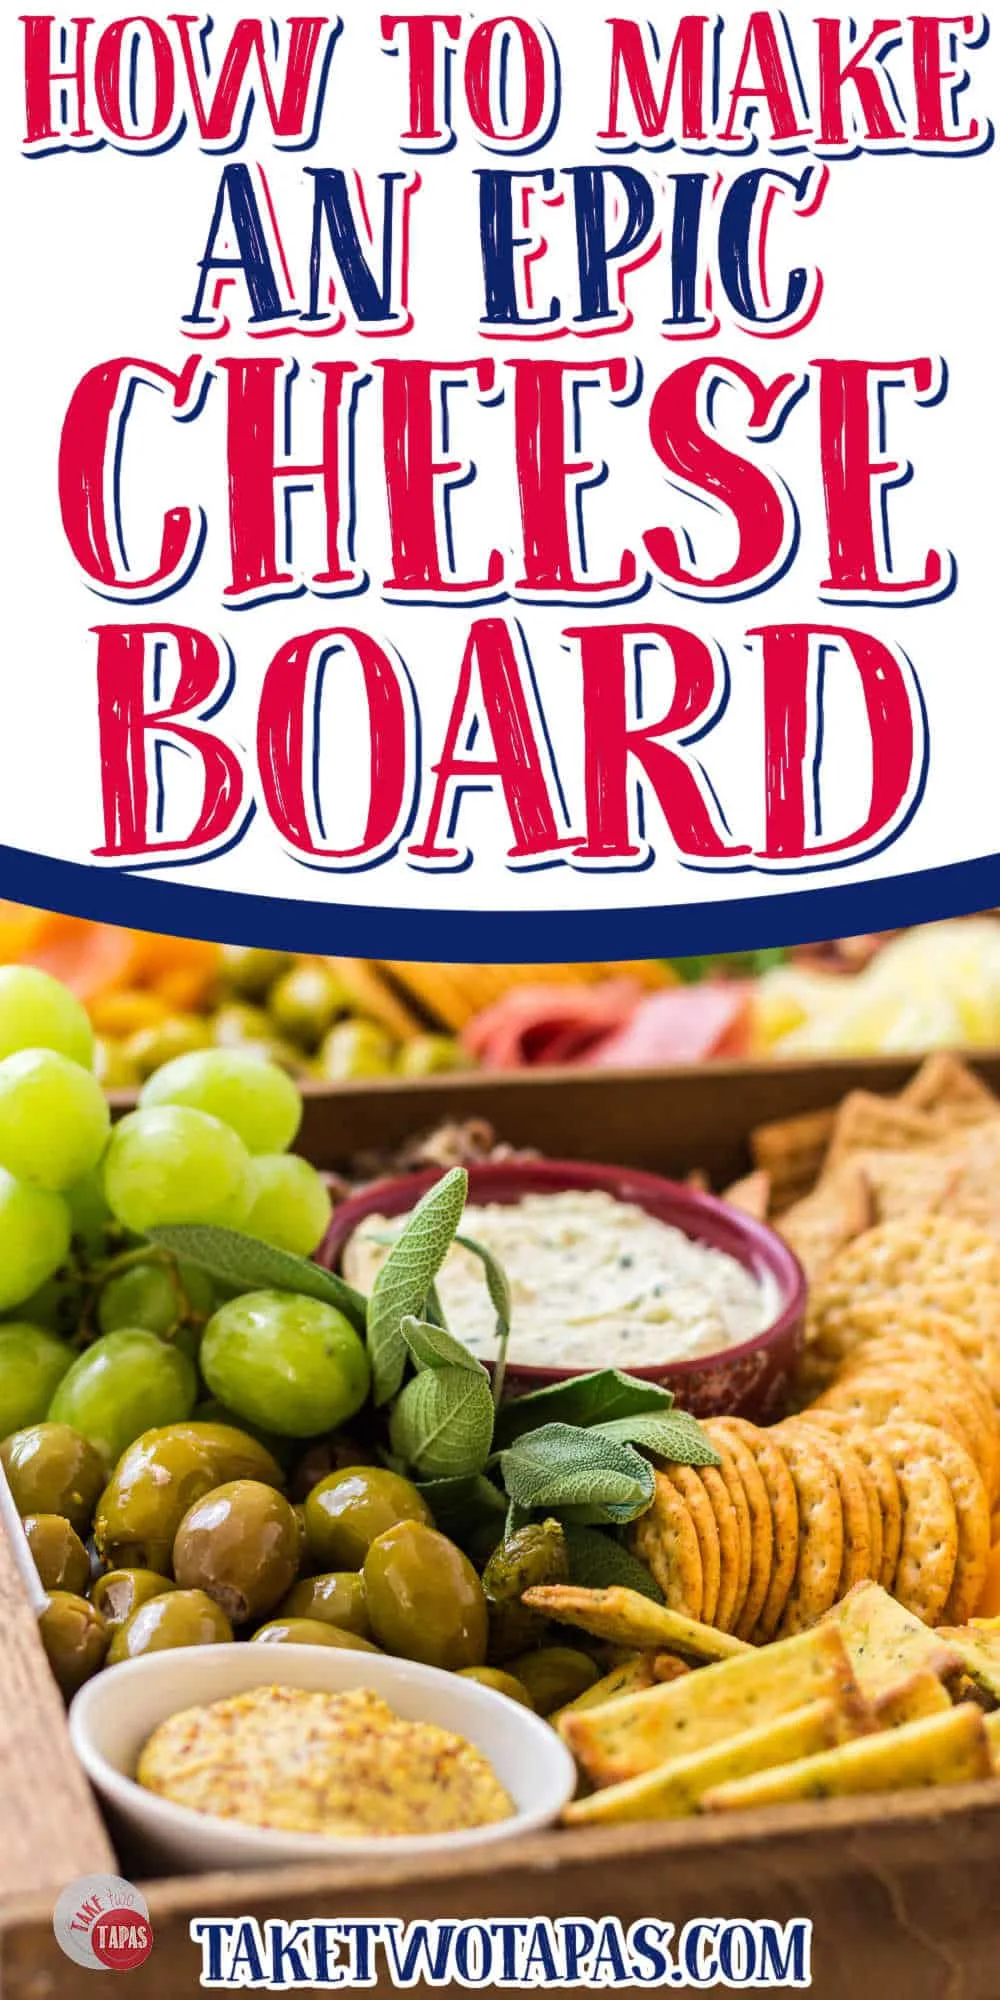 collage of cheese boards